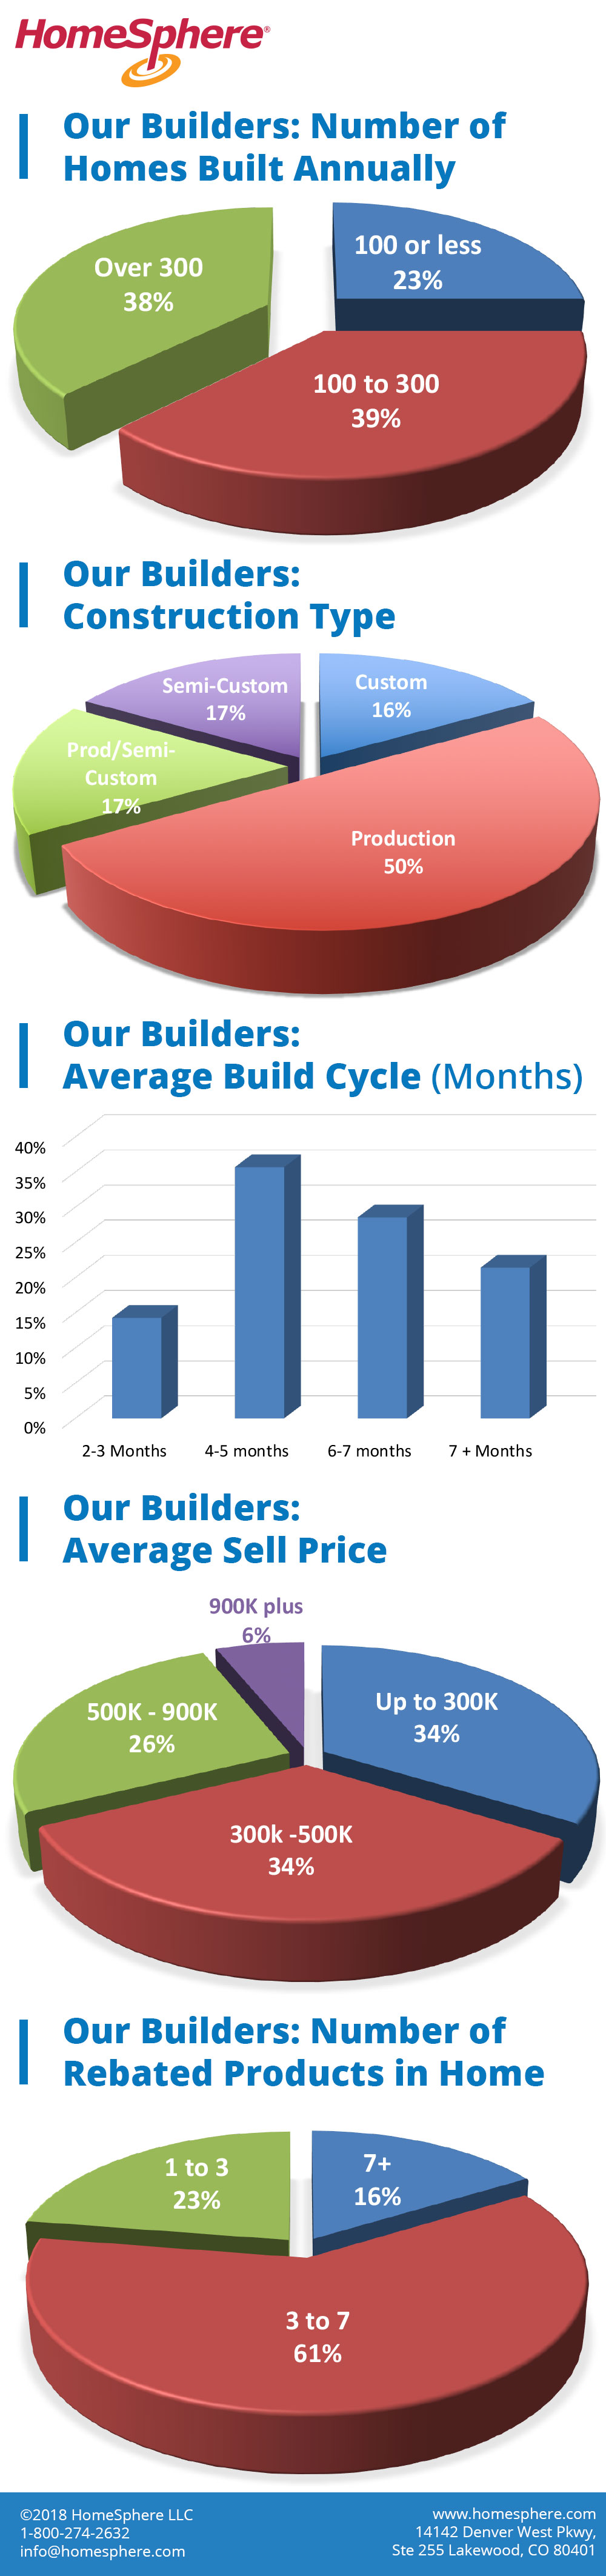 HomeSphere-Builders-by-the-Numbers-Infographic